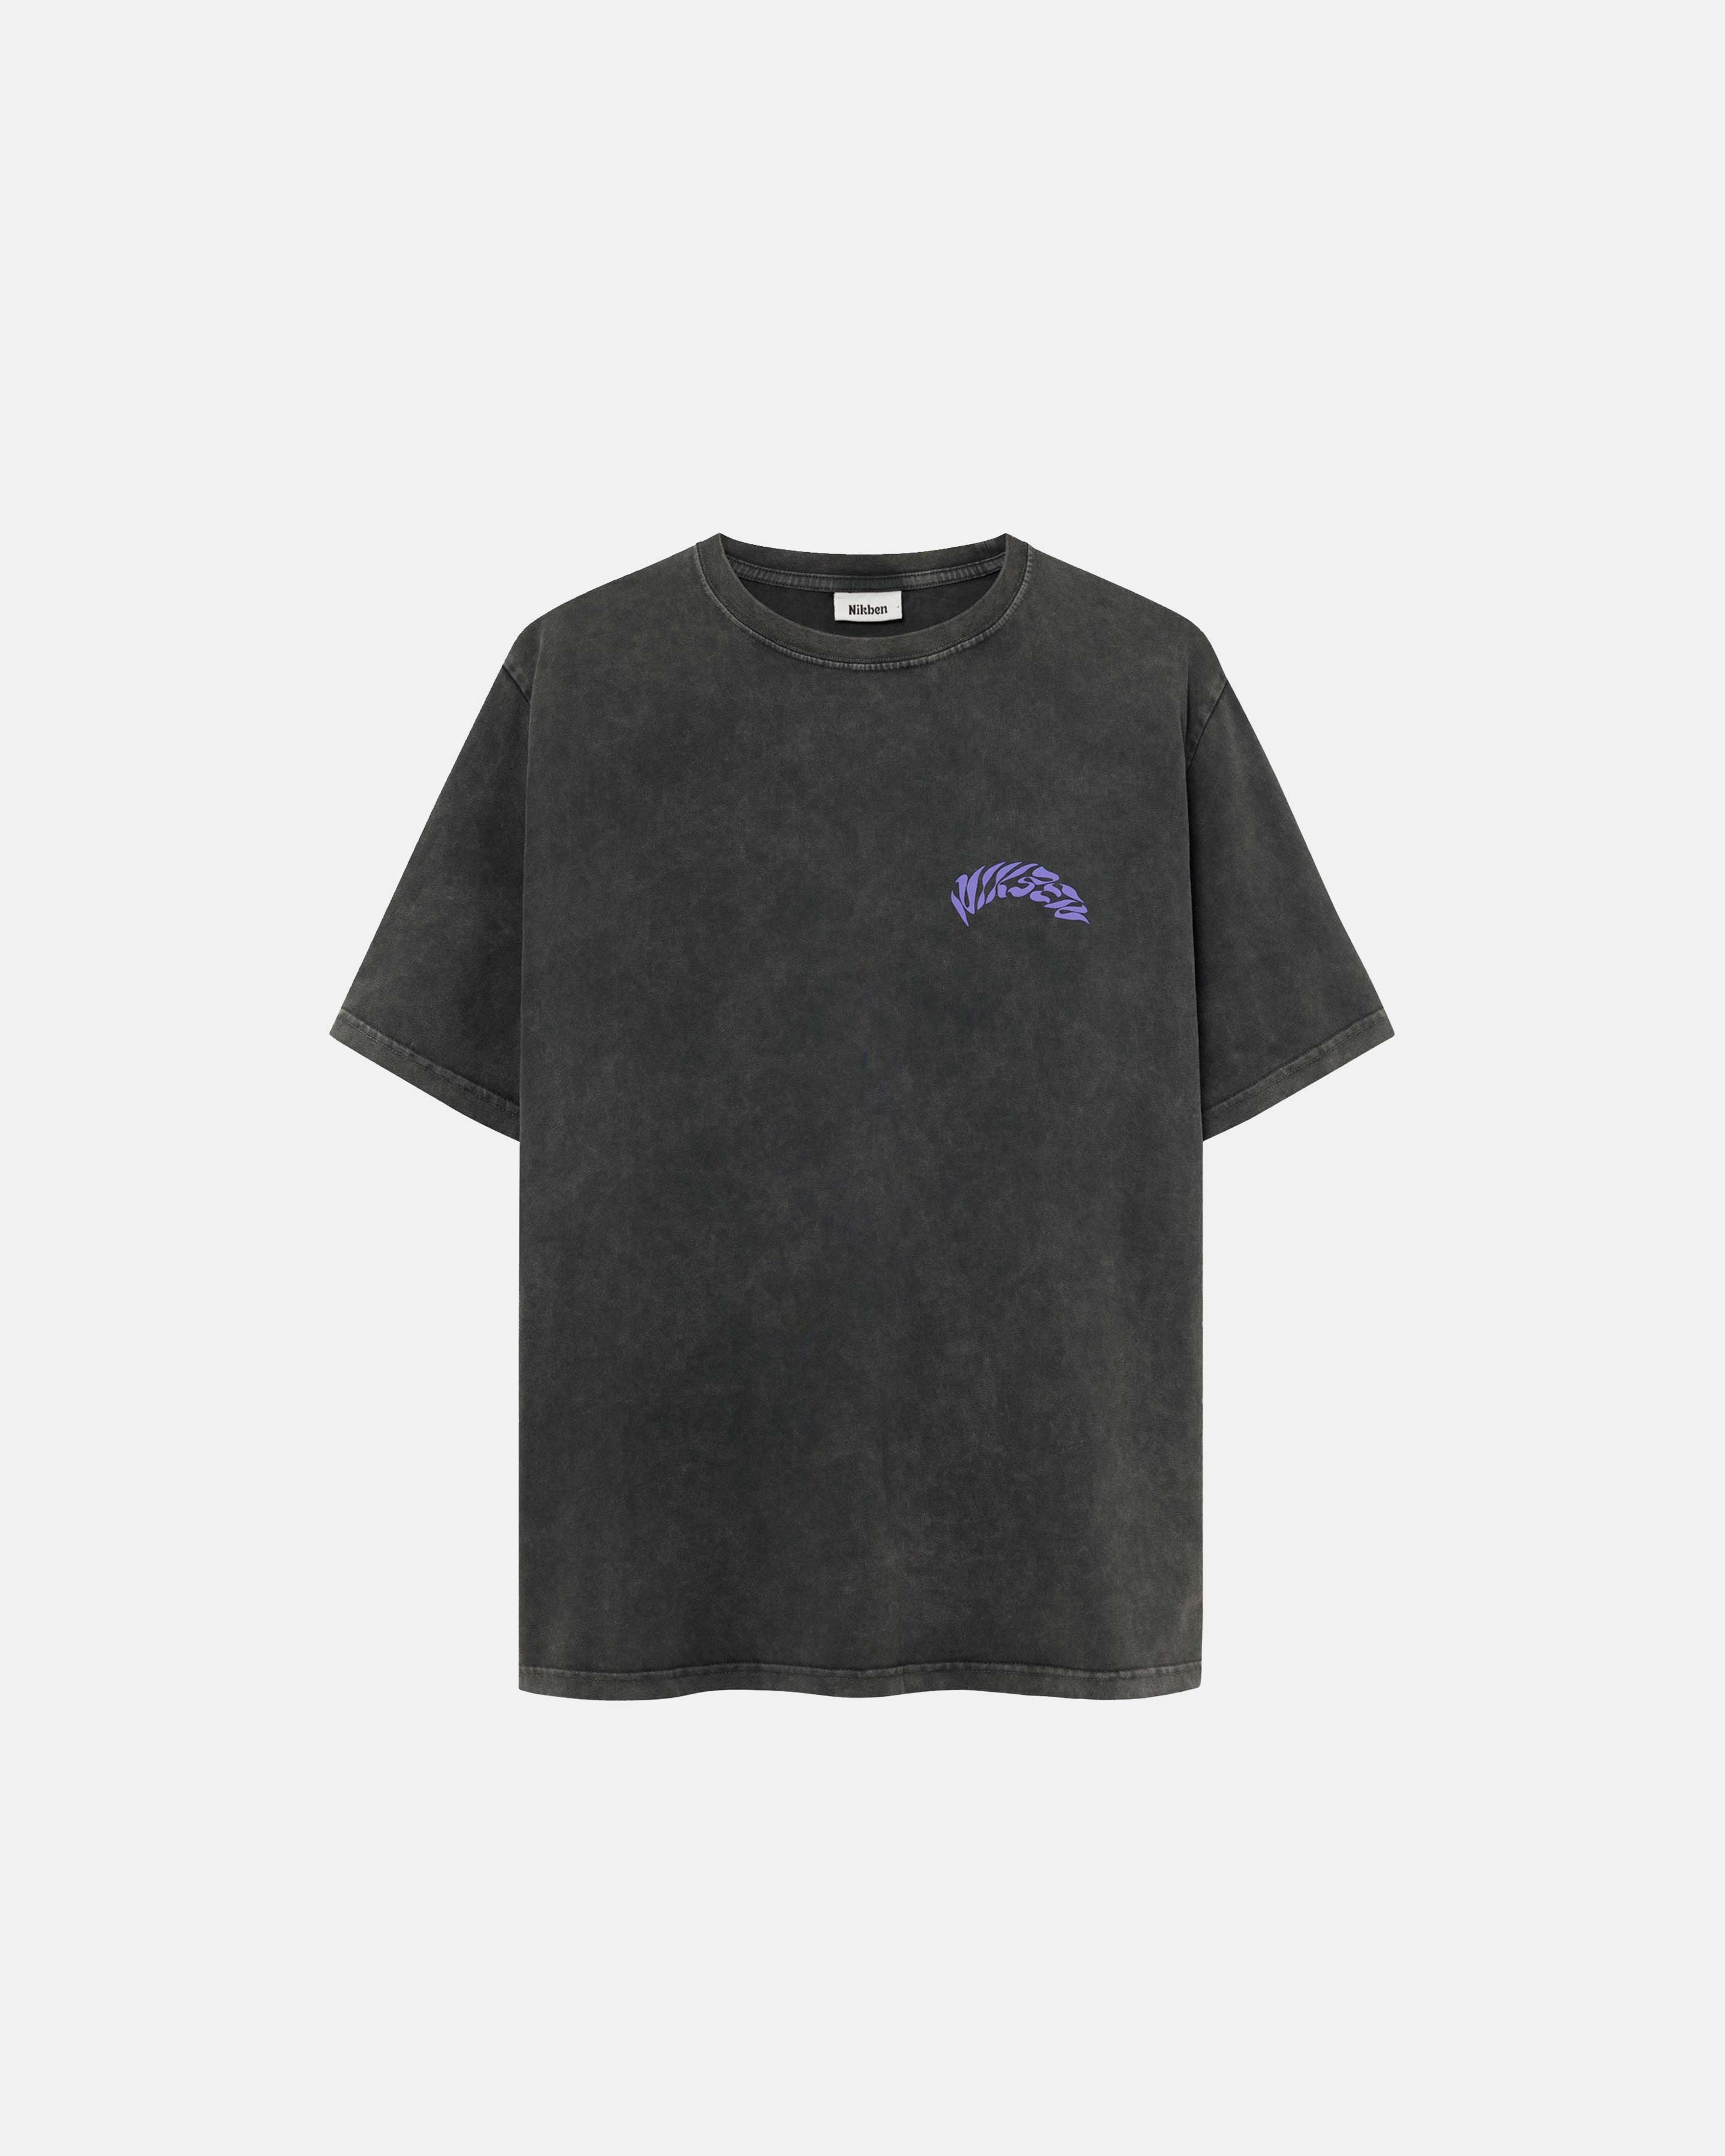 Washed black t-shirt with purple puffy 